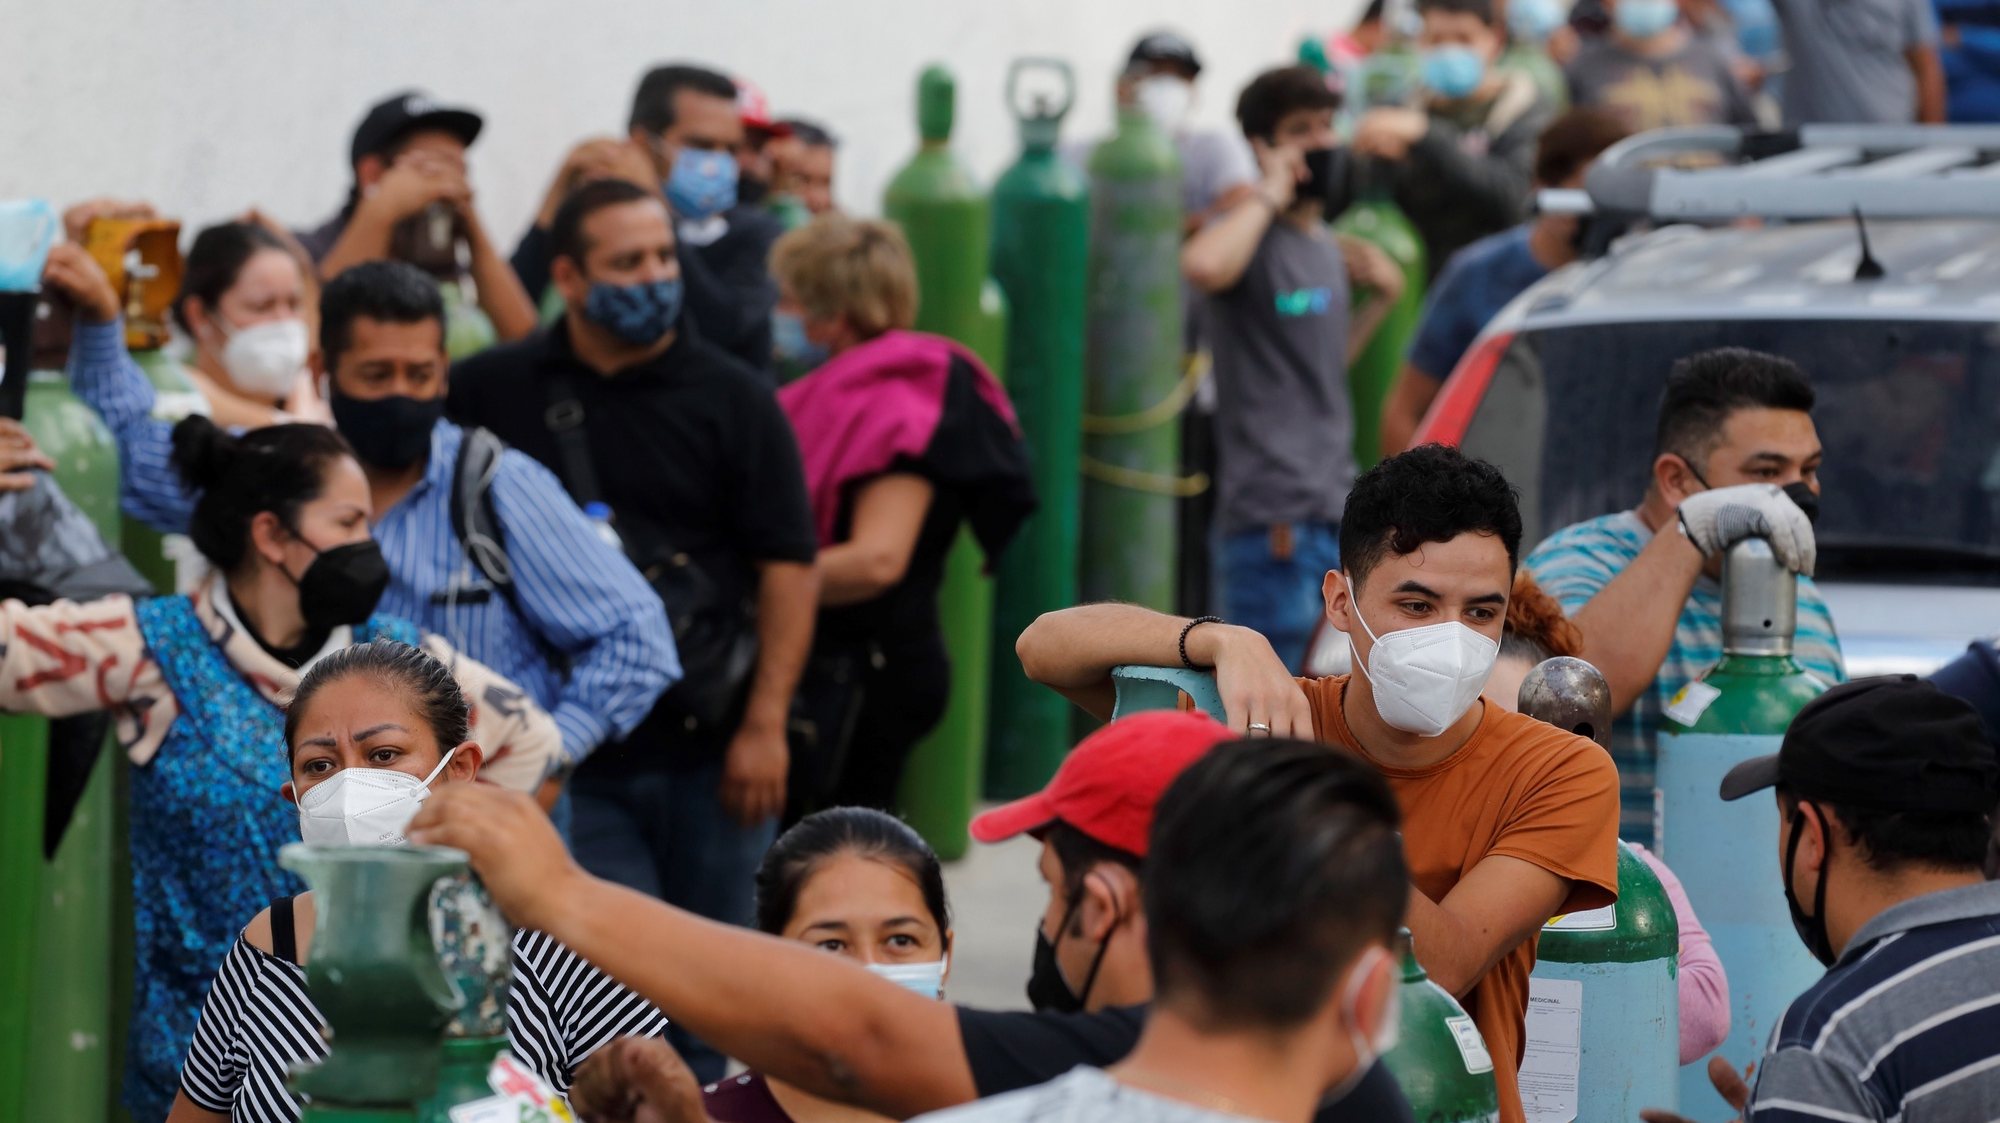 epa08950630 People wait for their turn to fill oxygen tanks in Guadalajara, Jalisco, Mexico, 19 January 2021. Mexico reported over 1,500 new Covid-related deaths in the past 24 hours, its highest single day death toll so far.  EPA/Francisco Guasco